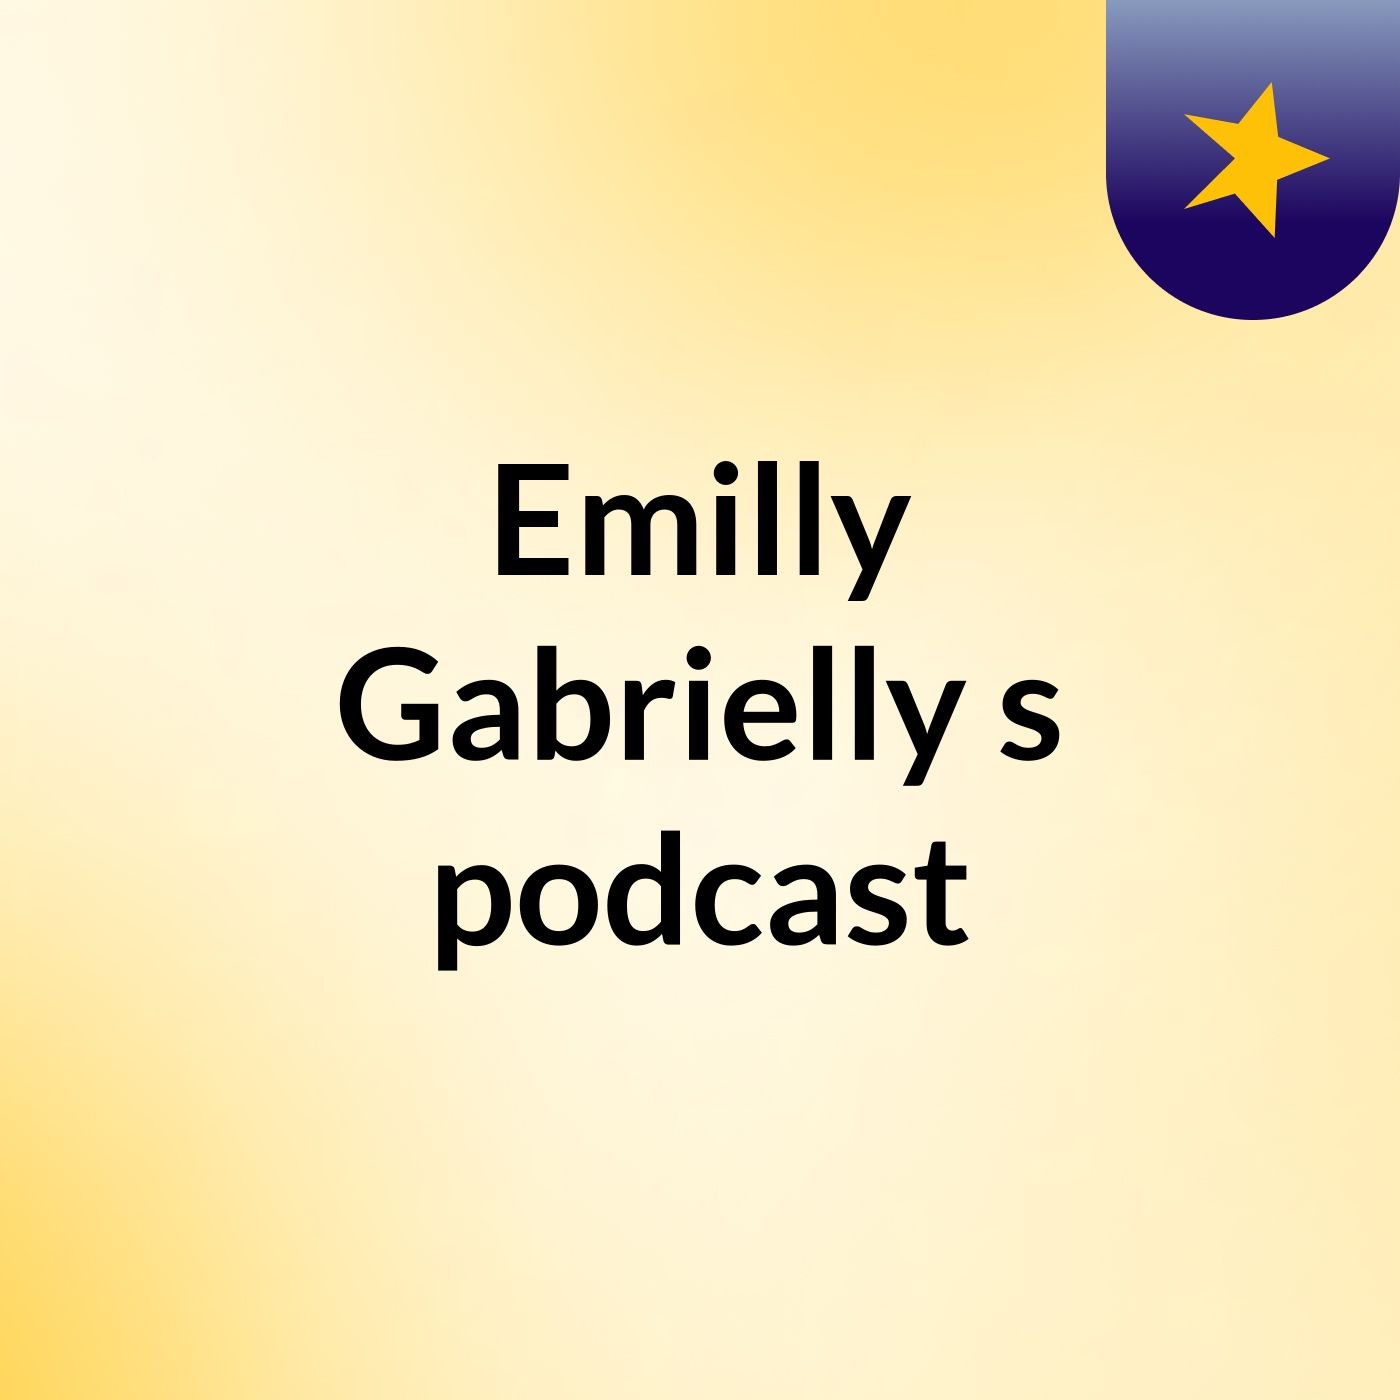 Emilly Gabrielly's podcast